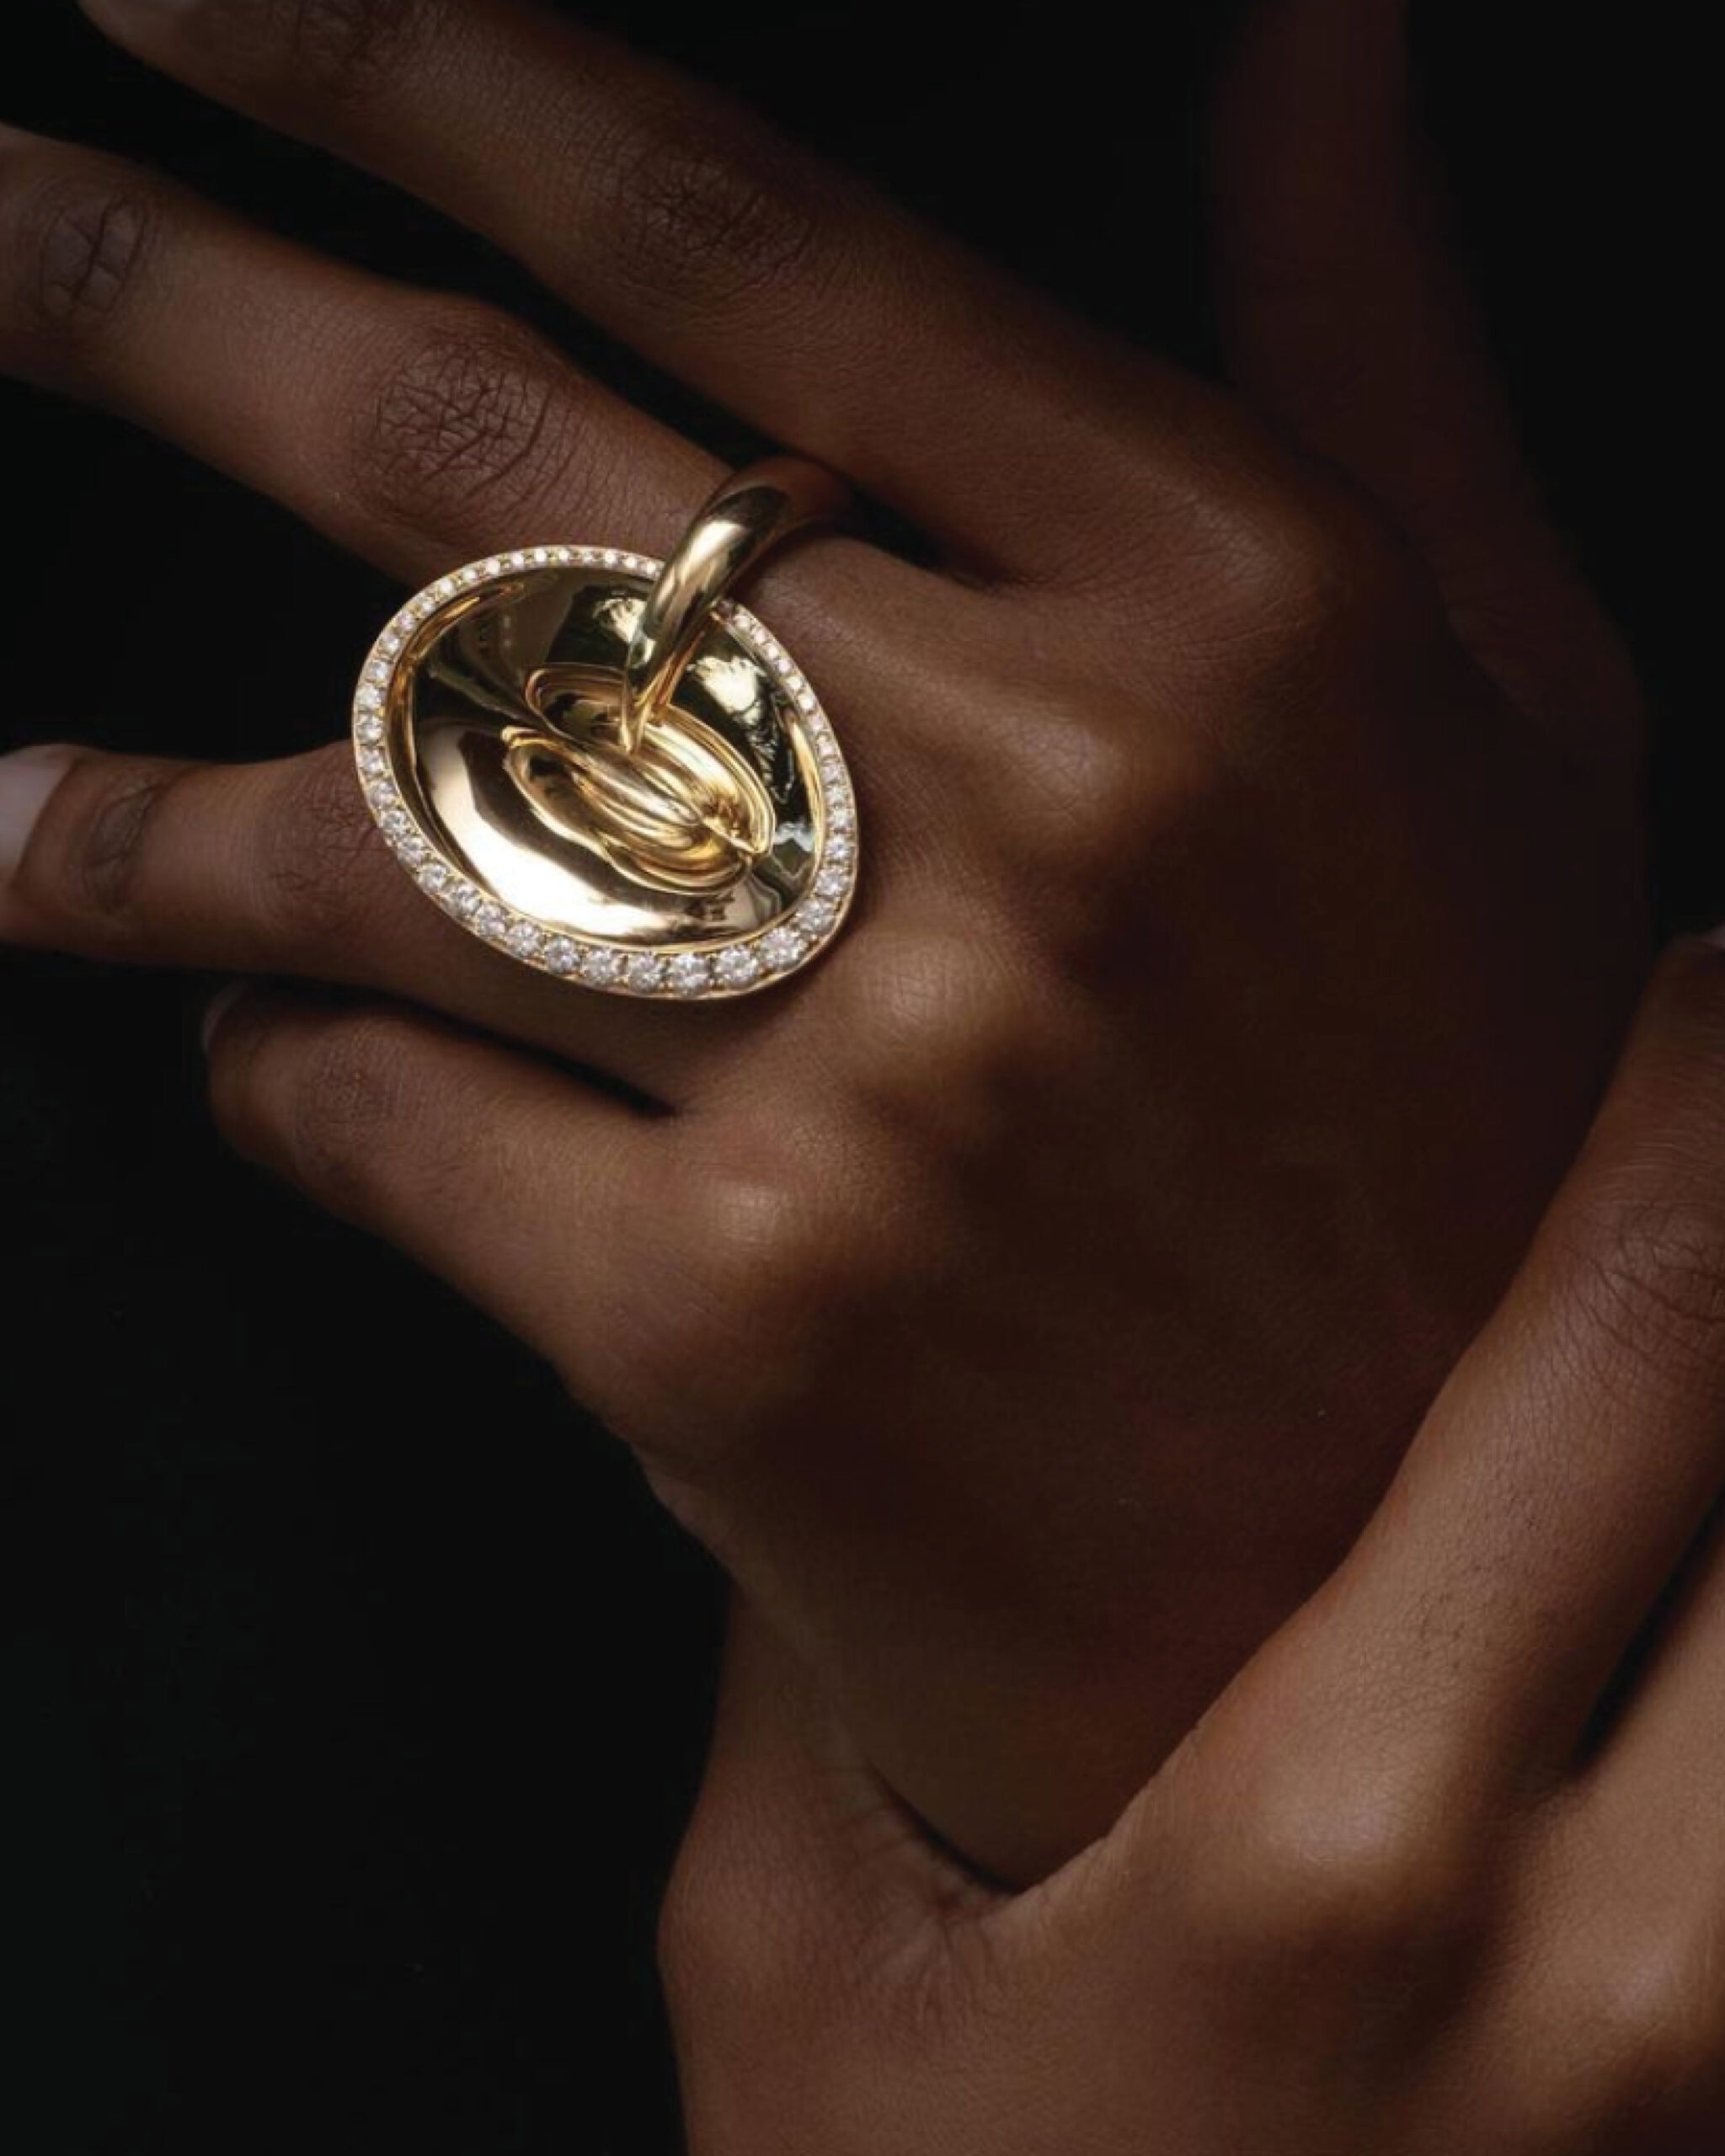 SINE gold cocktail ring from VRAM that features a sculptural gold piece encased in pave diamonds